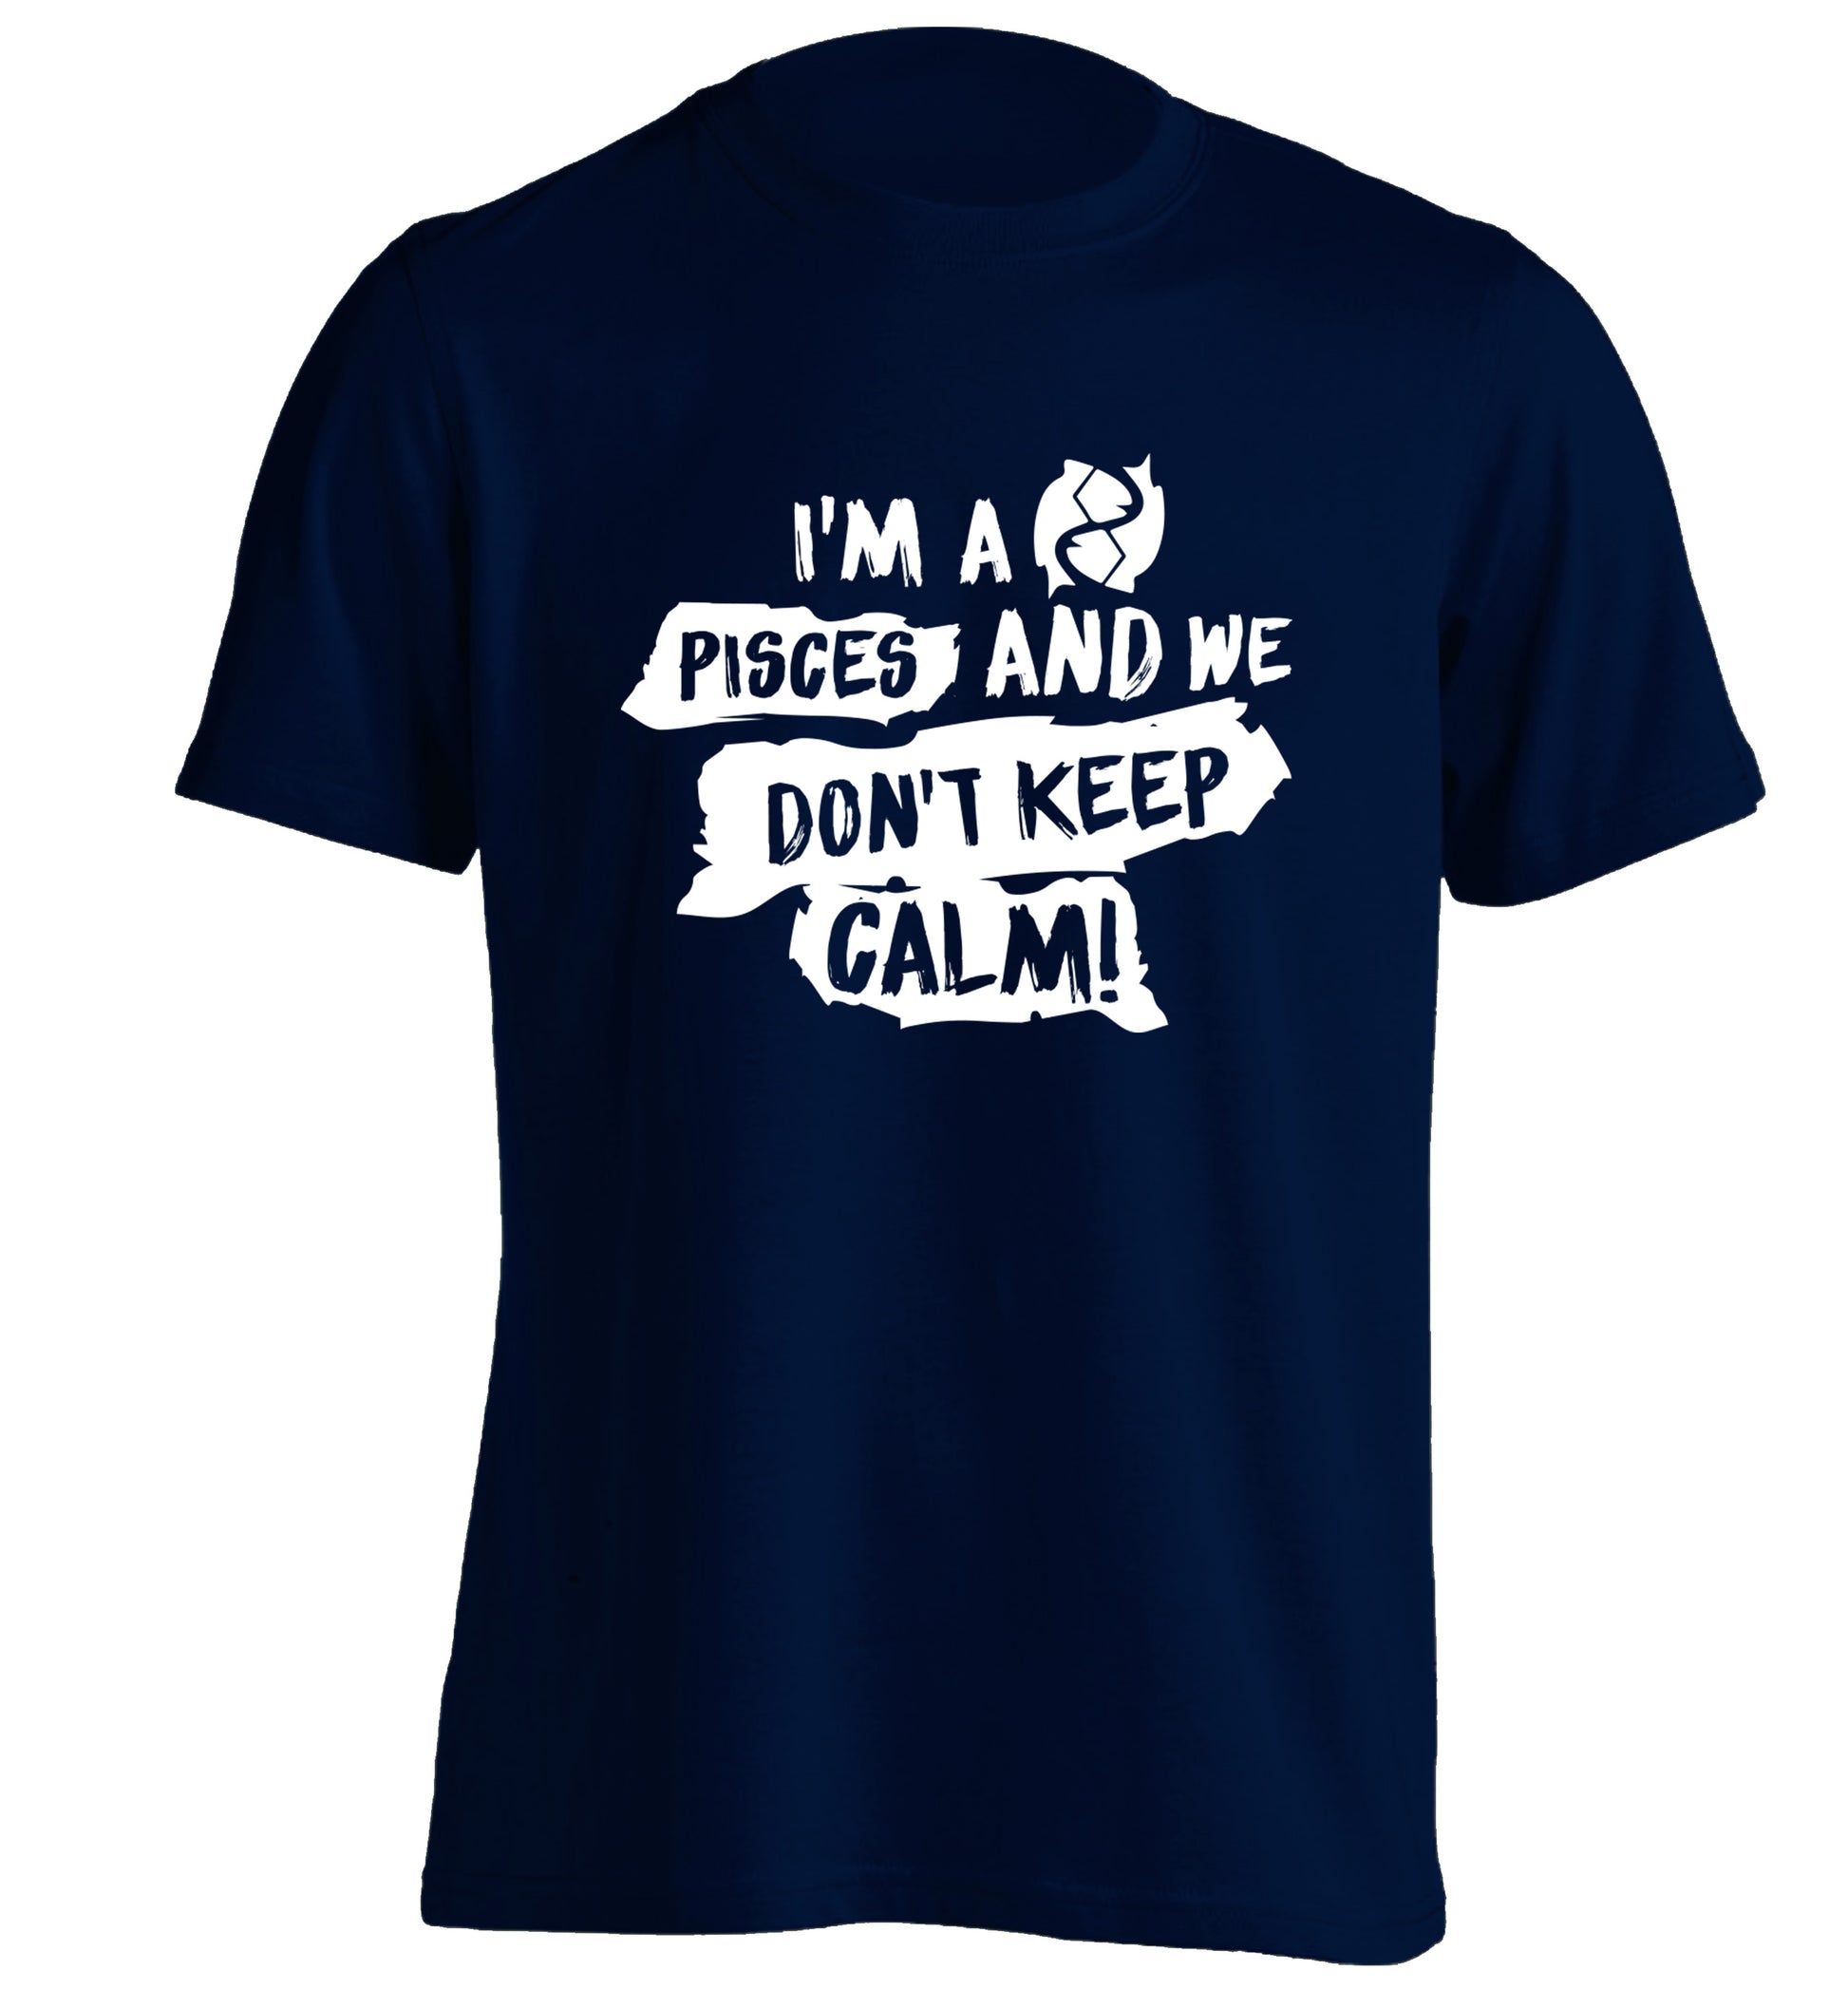 I'm a pisces and we don't keep calm adults unisex navy Tshirt 2XL